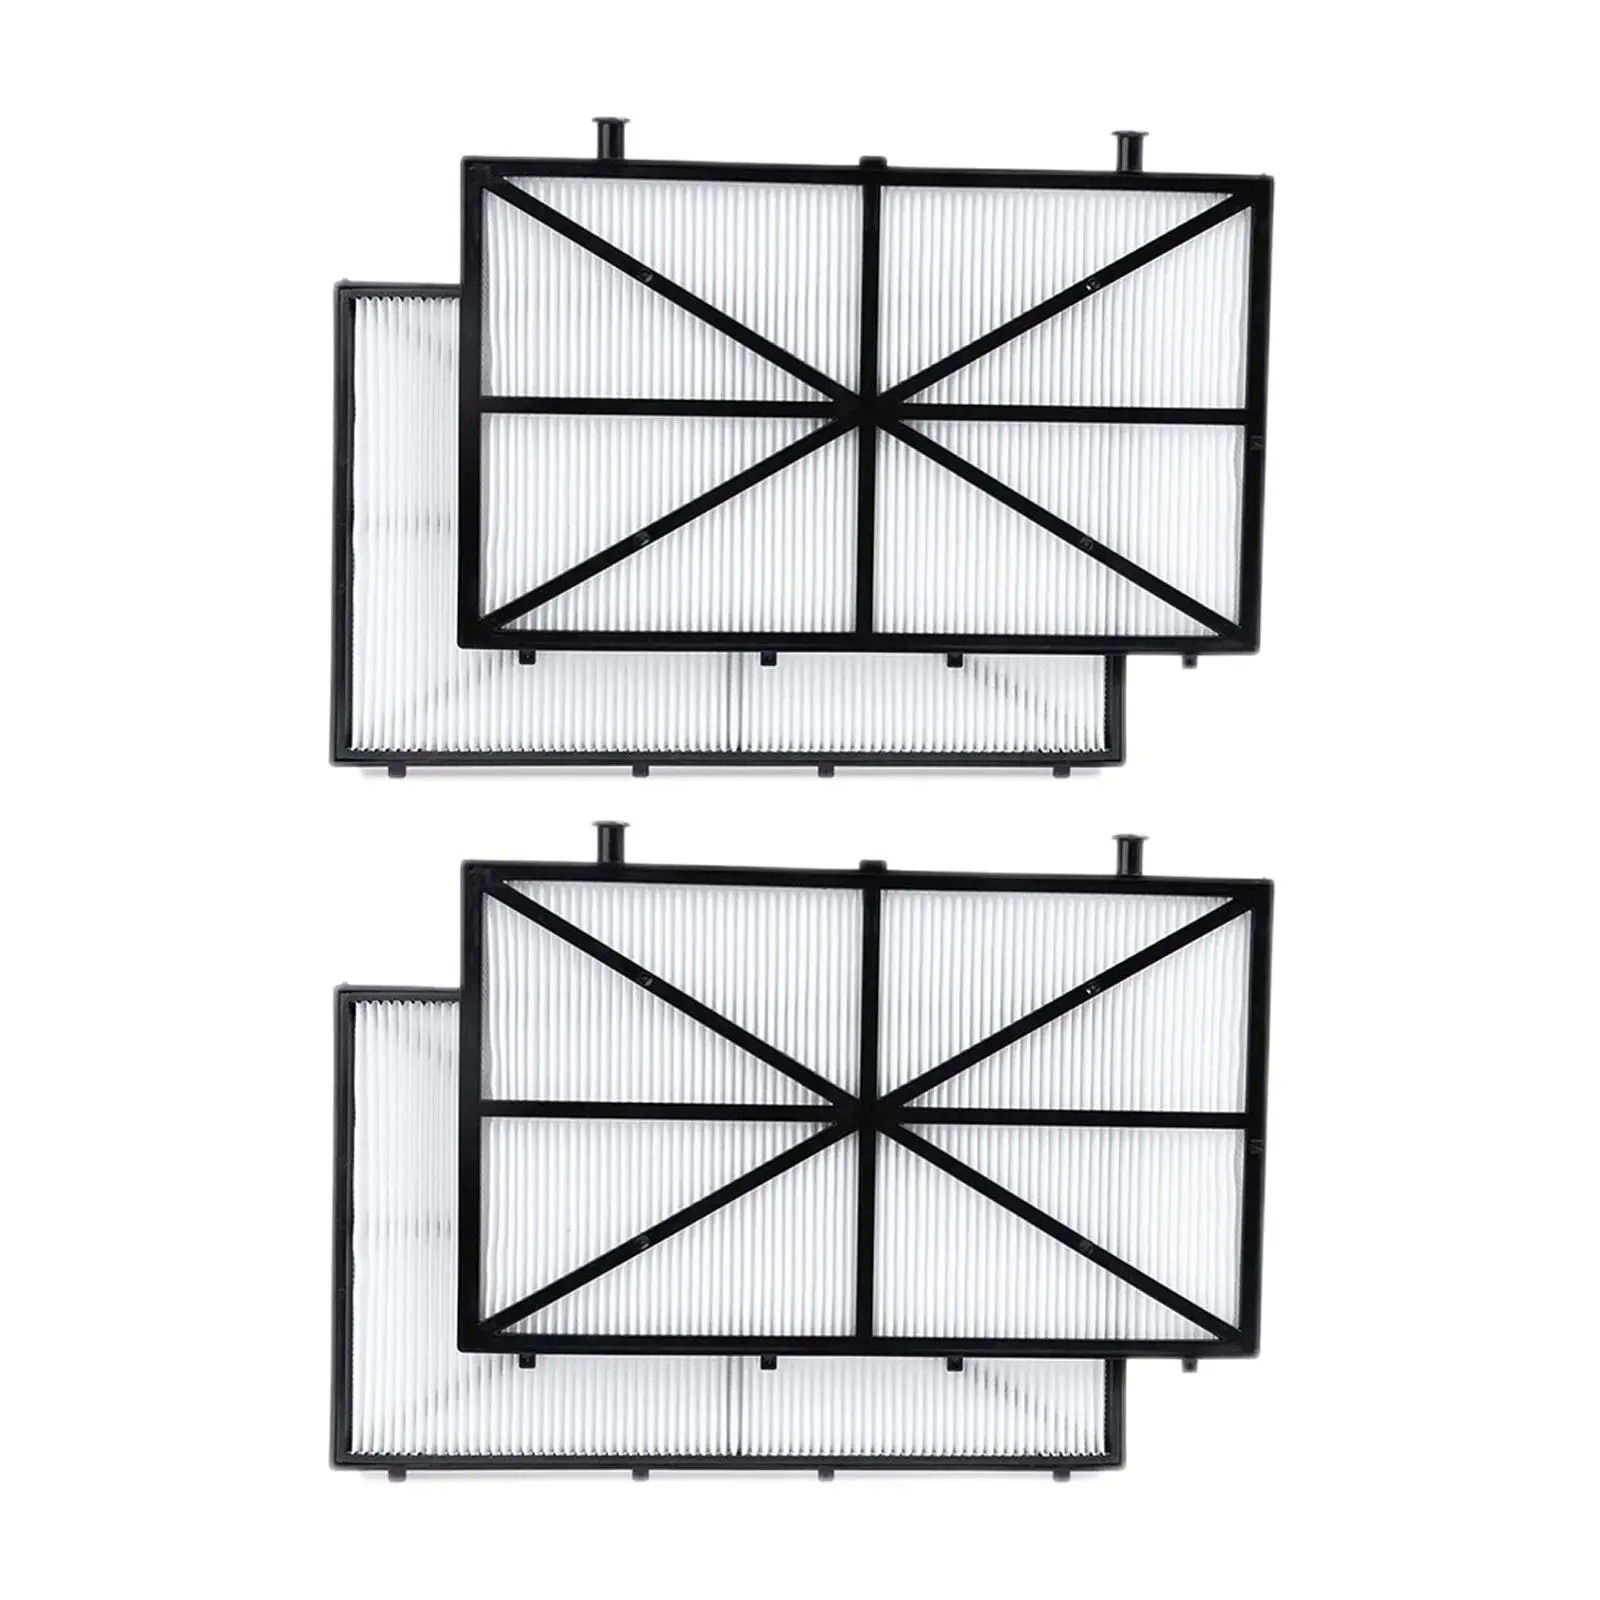 Replacement  Filter, Robotic  Filter Panels Fine Filters, for Dolphin Accs